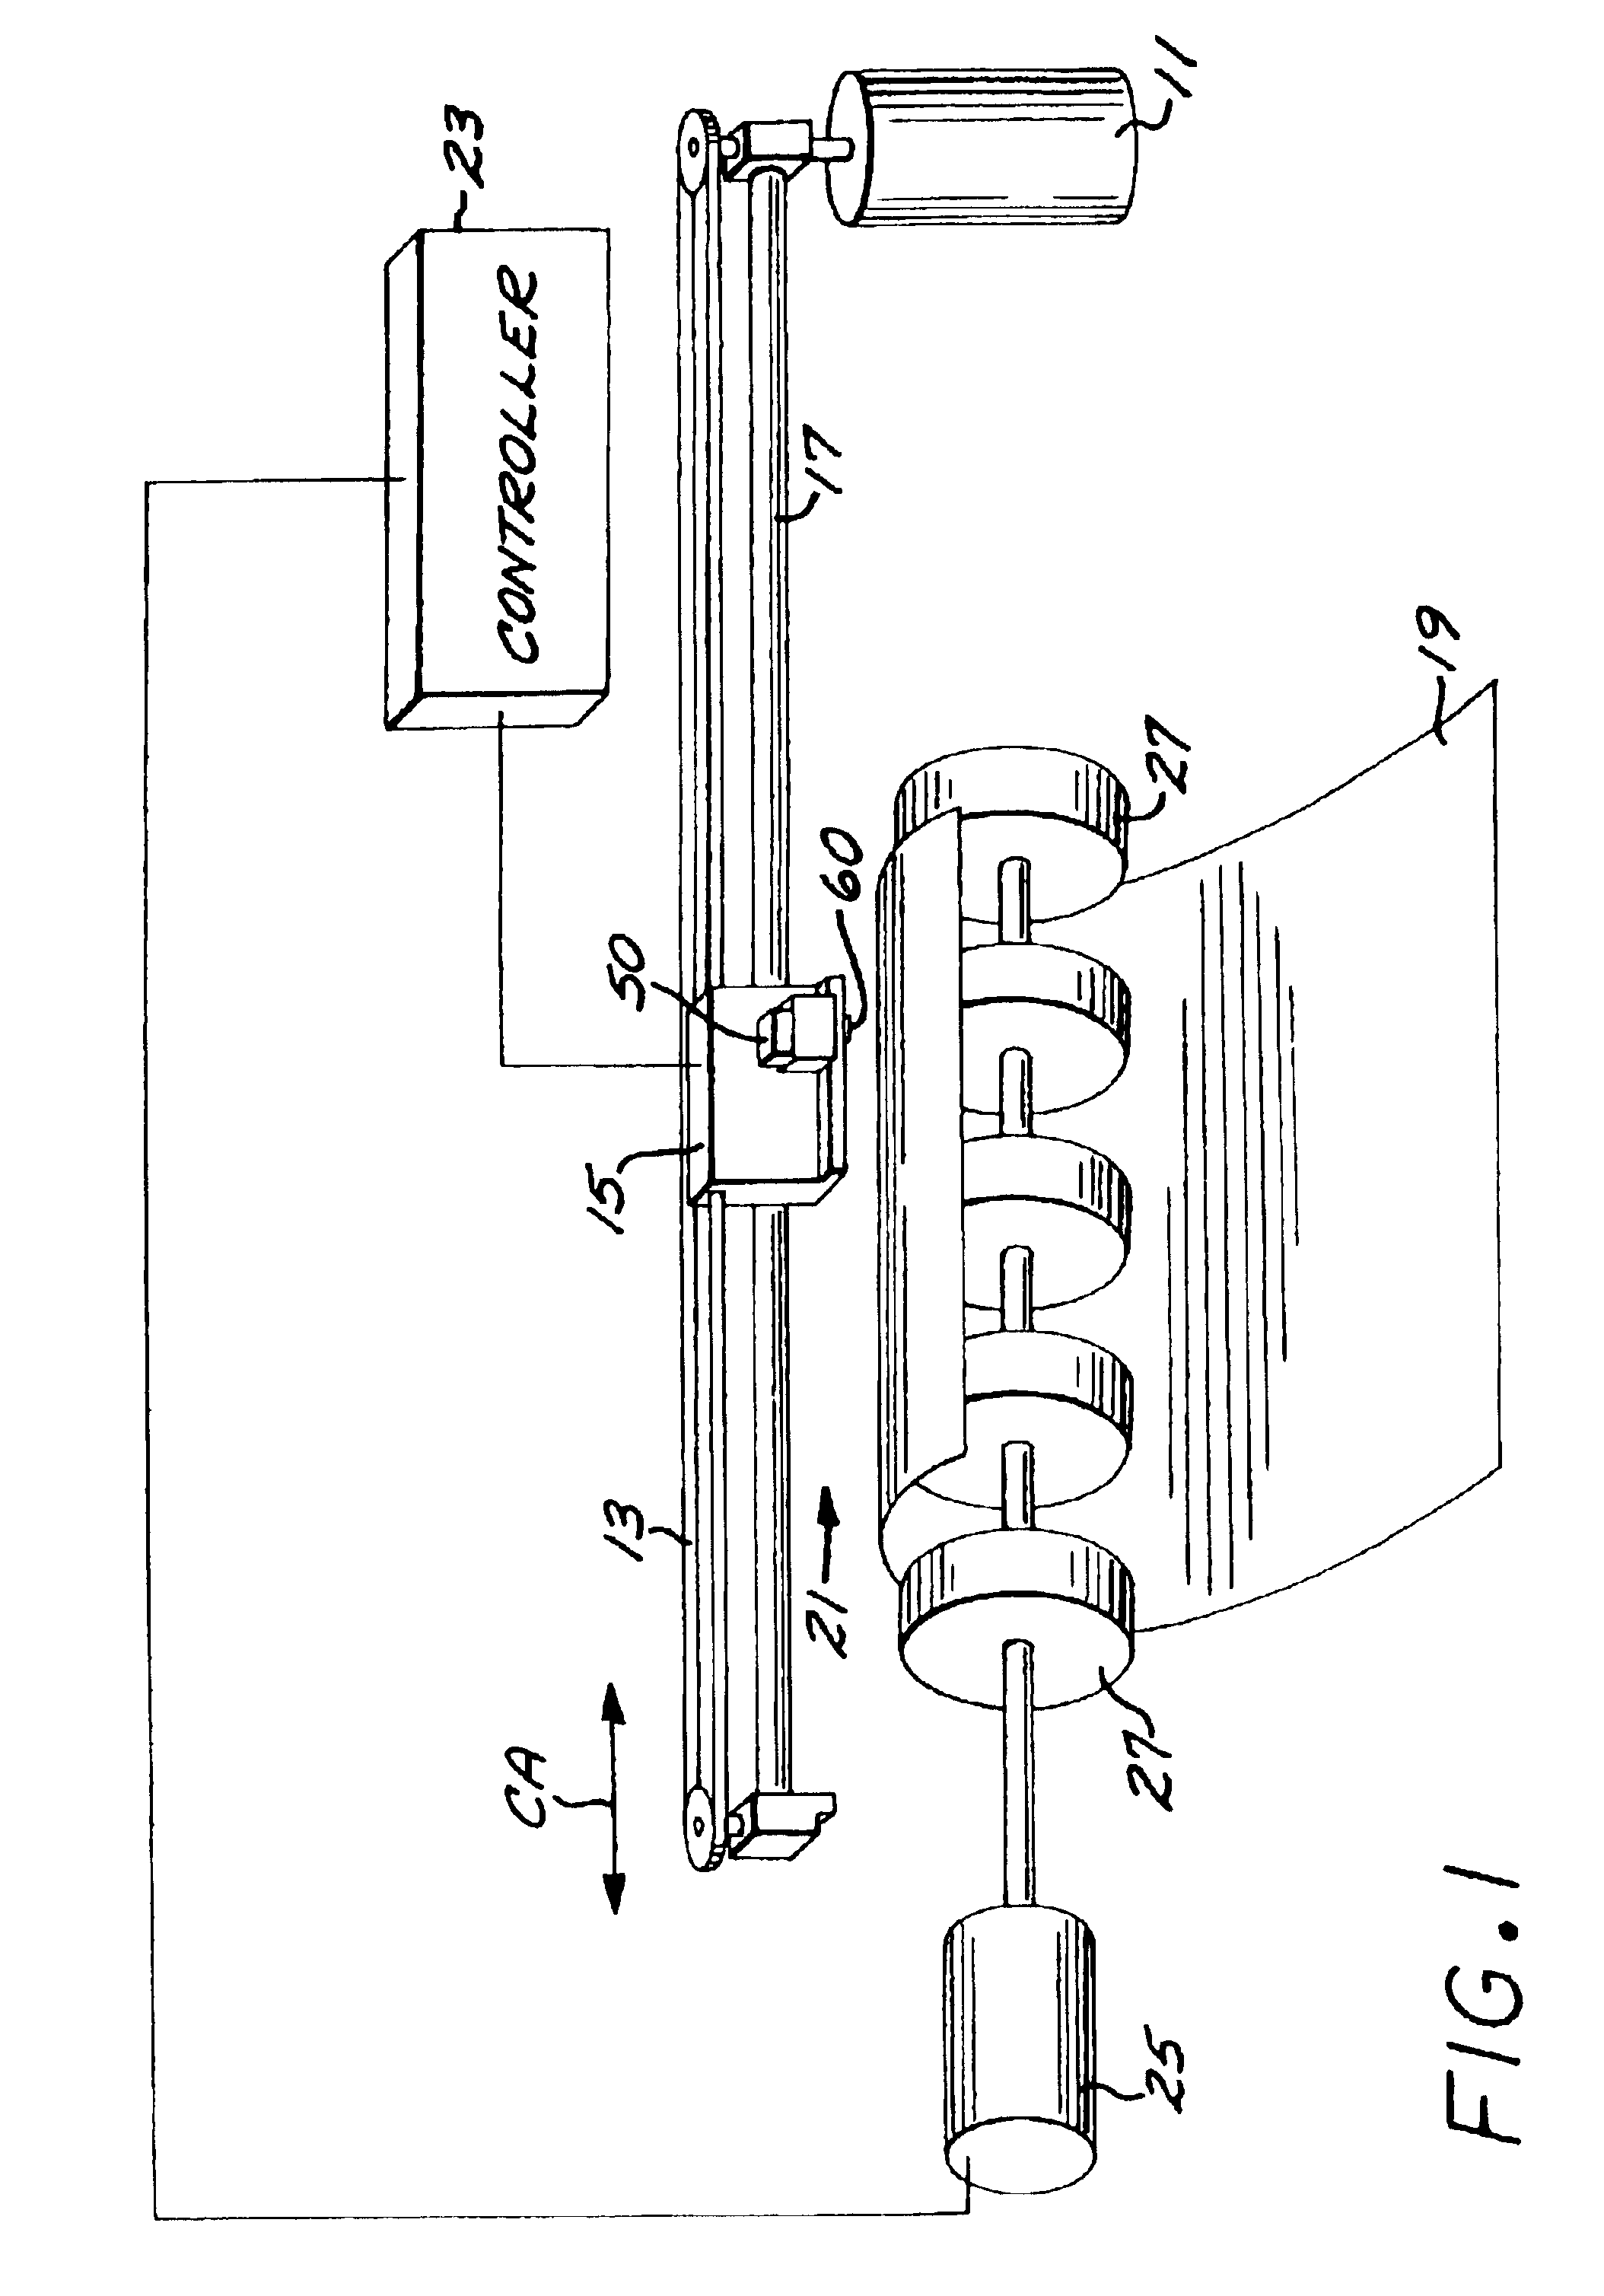 Method of making printed battery structures